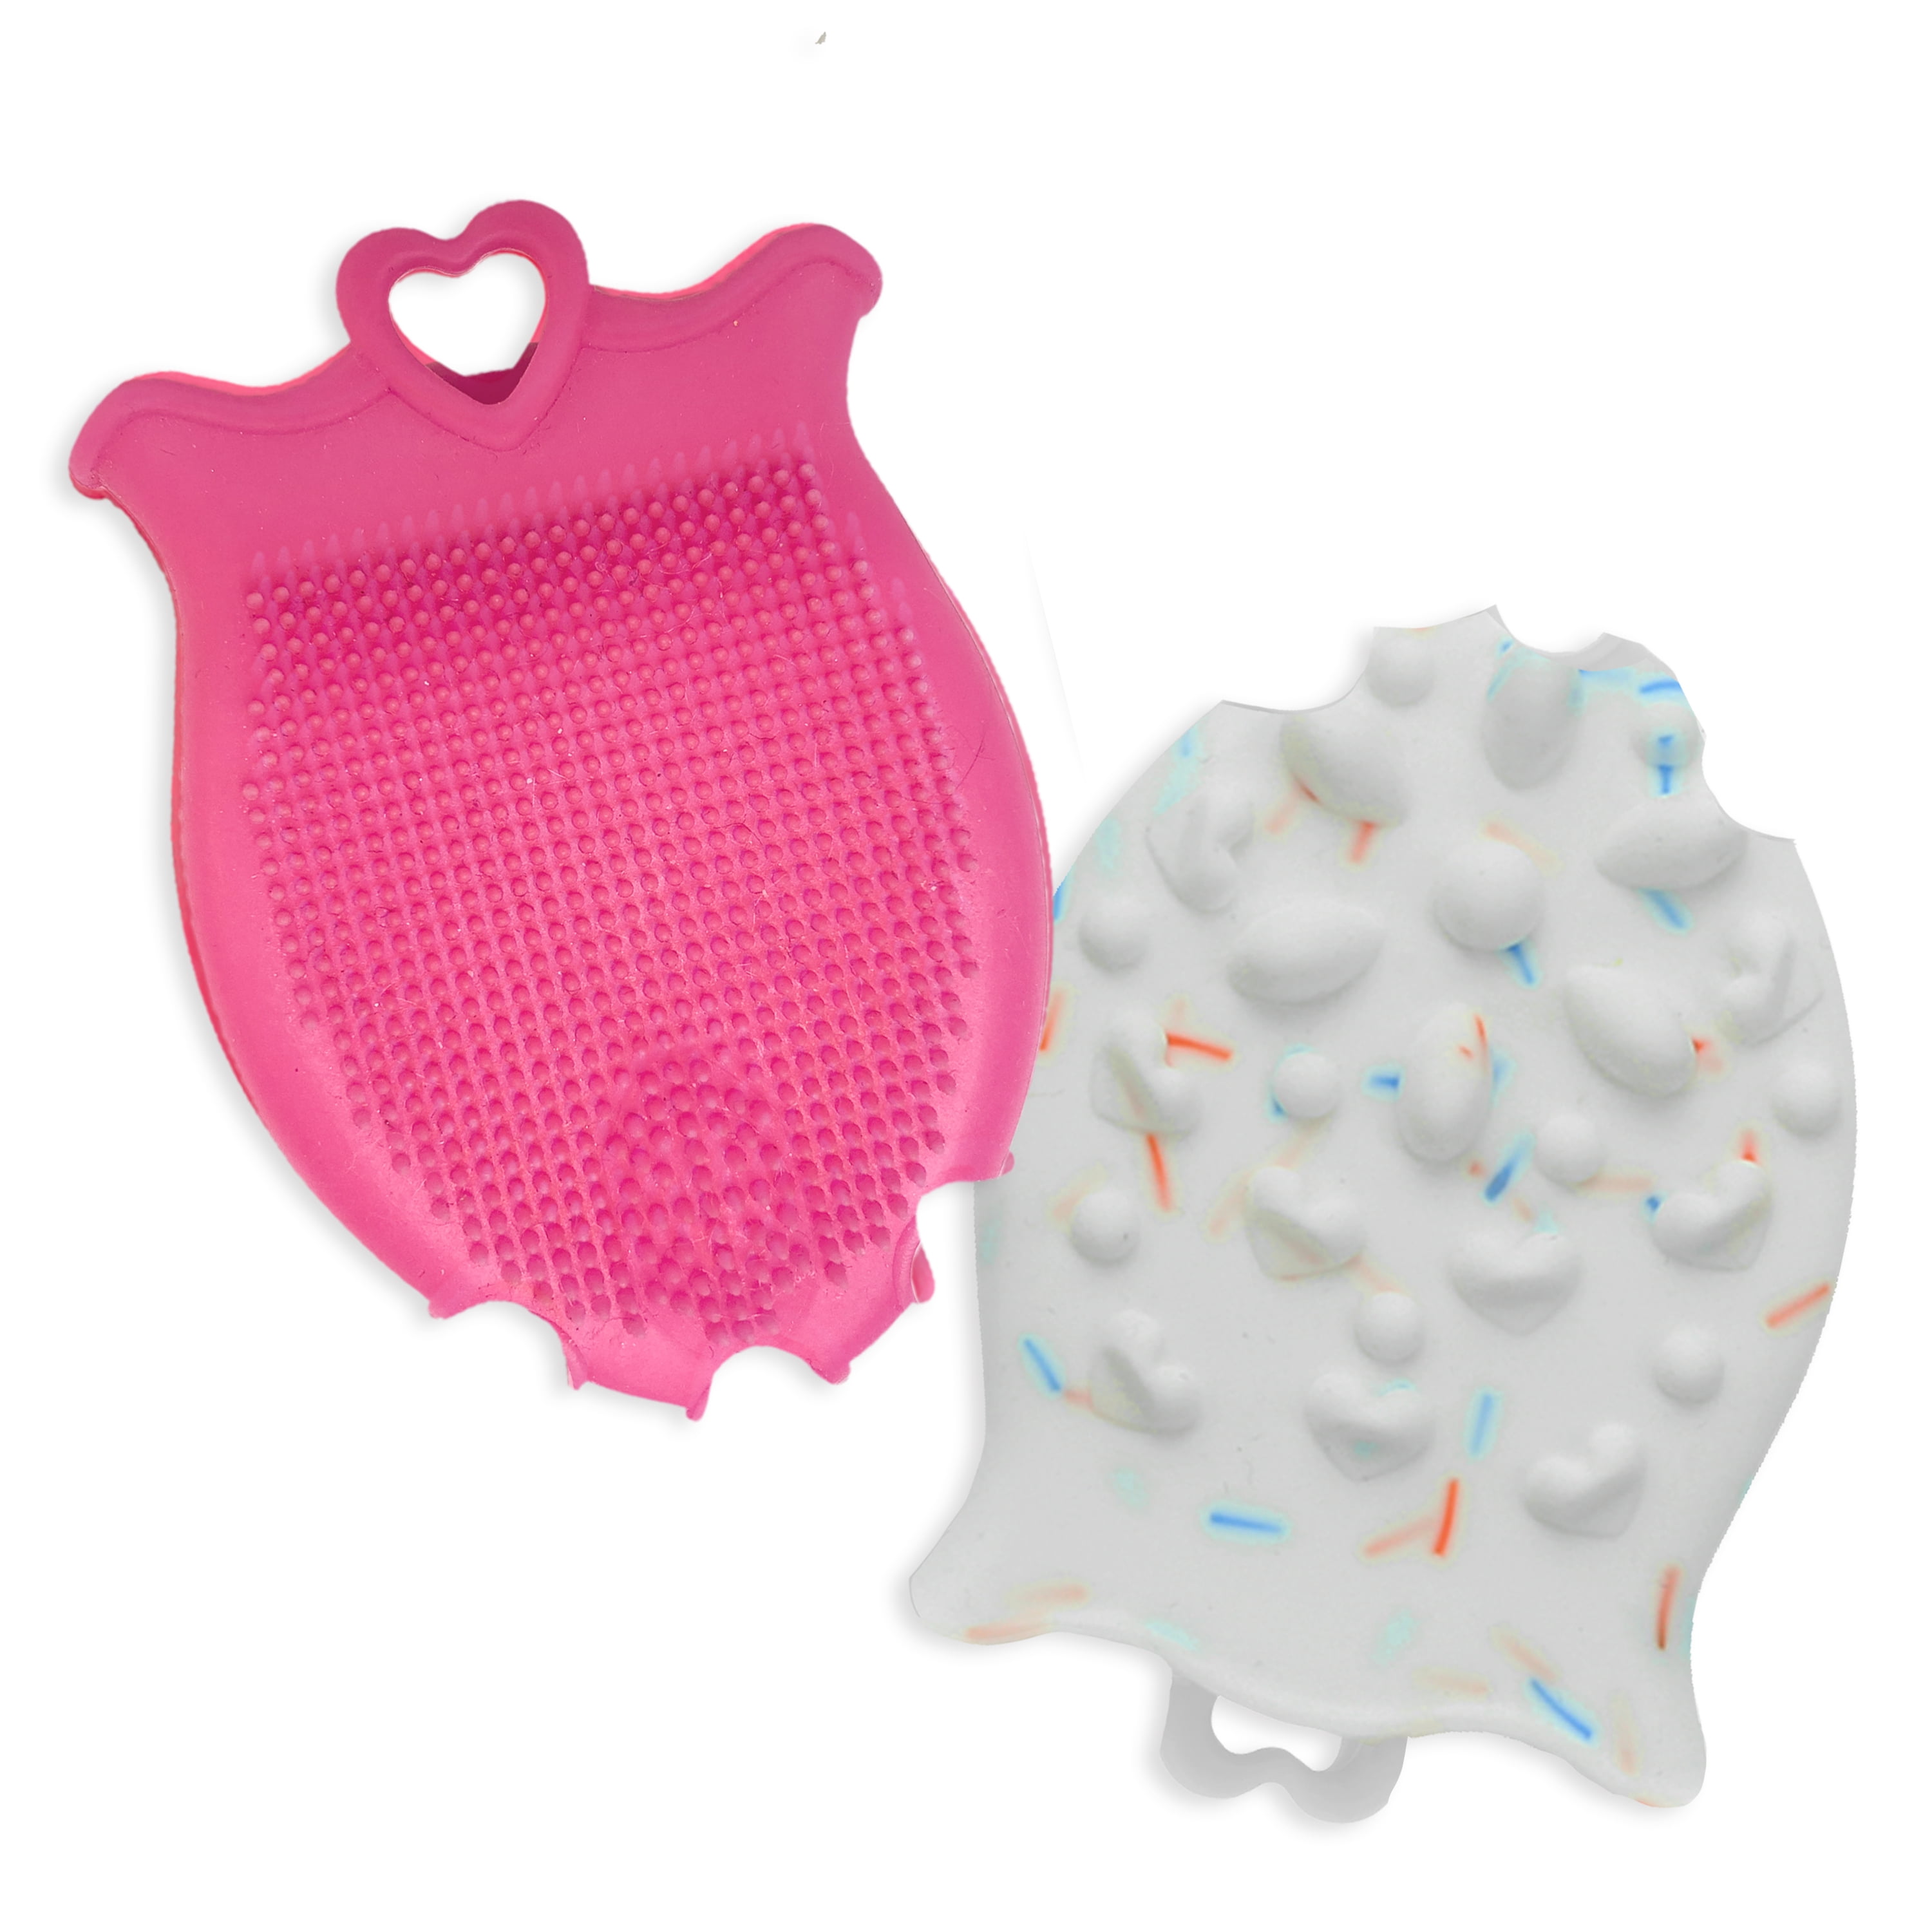 Introducing FUN Silicone, skin-safe silicone compatible with Accu